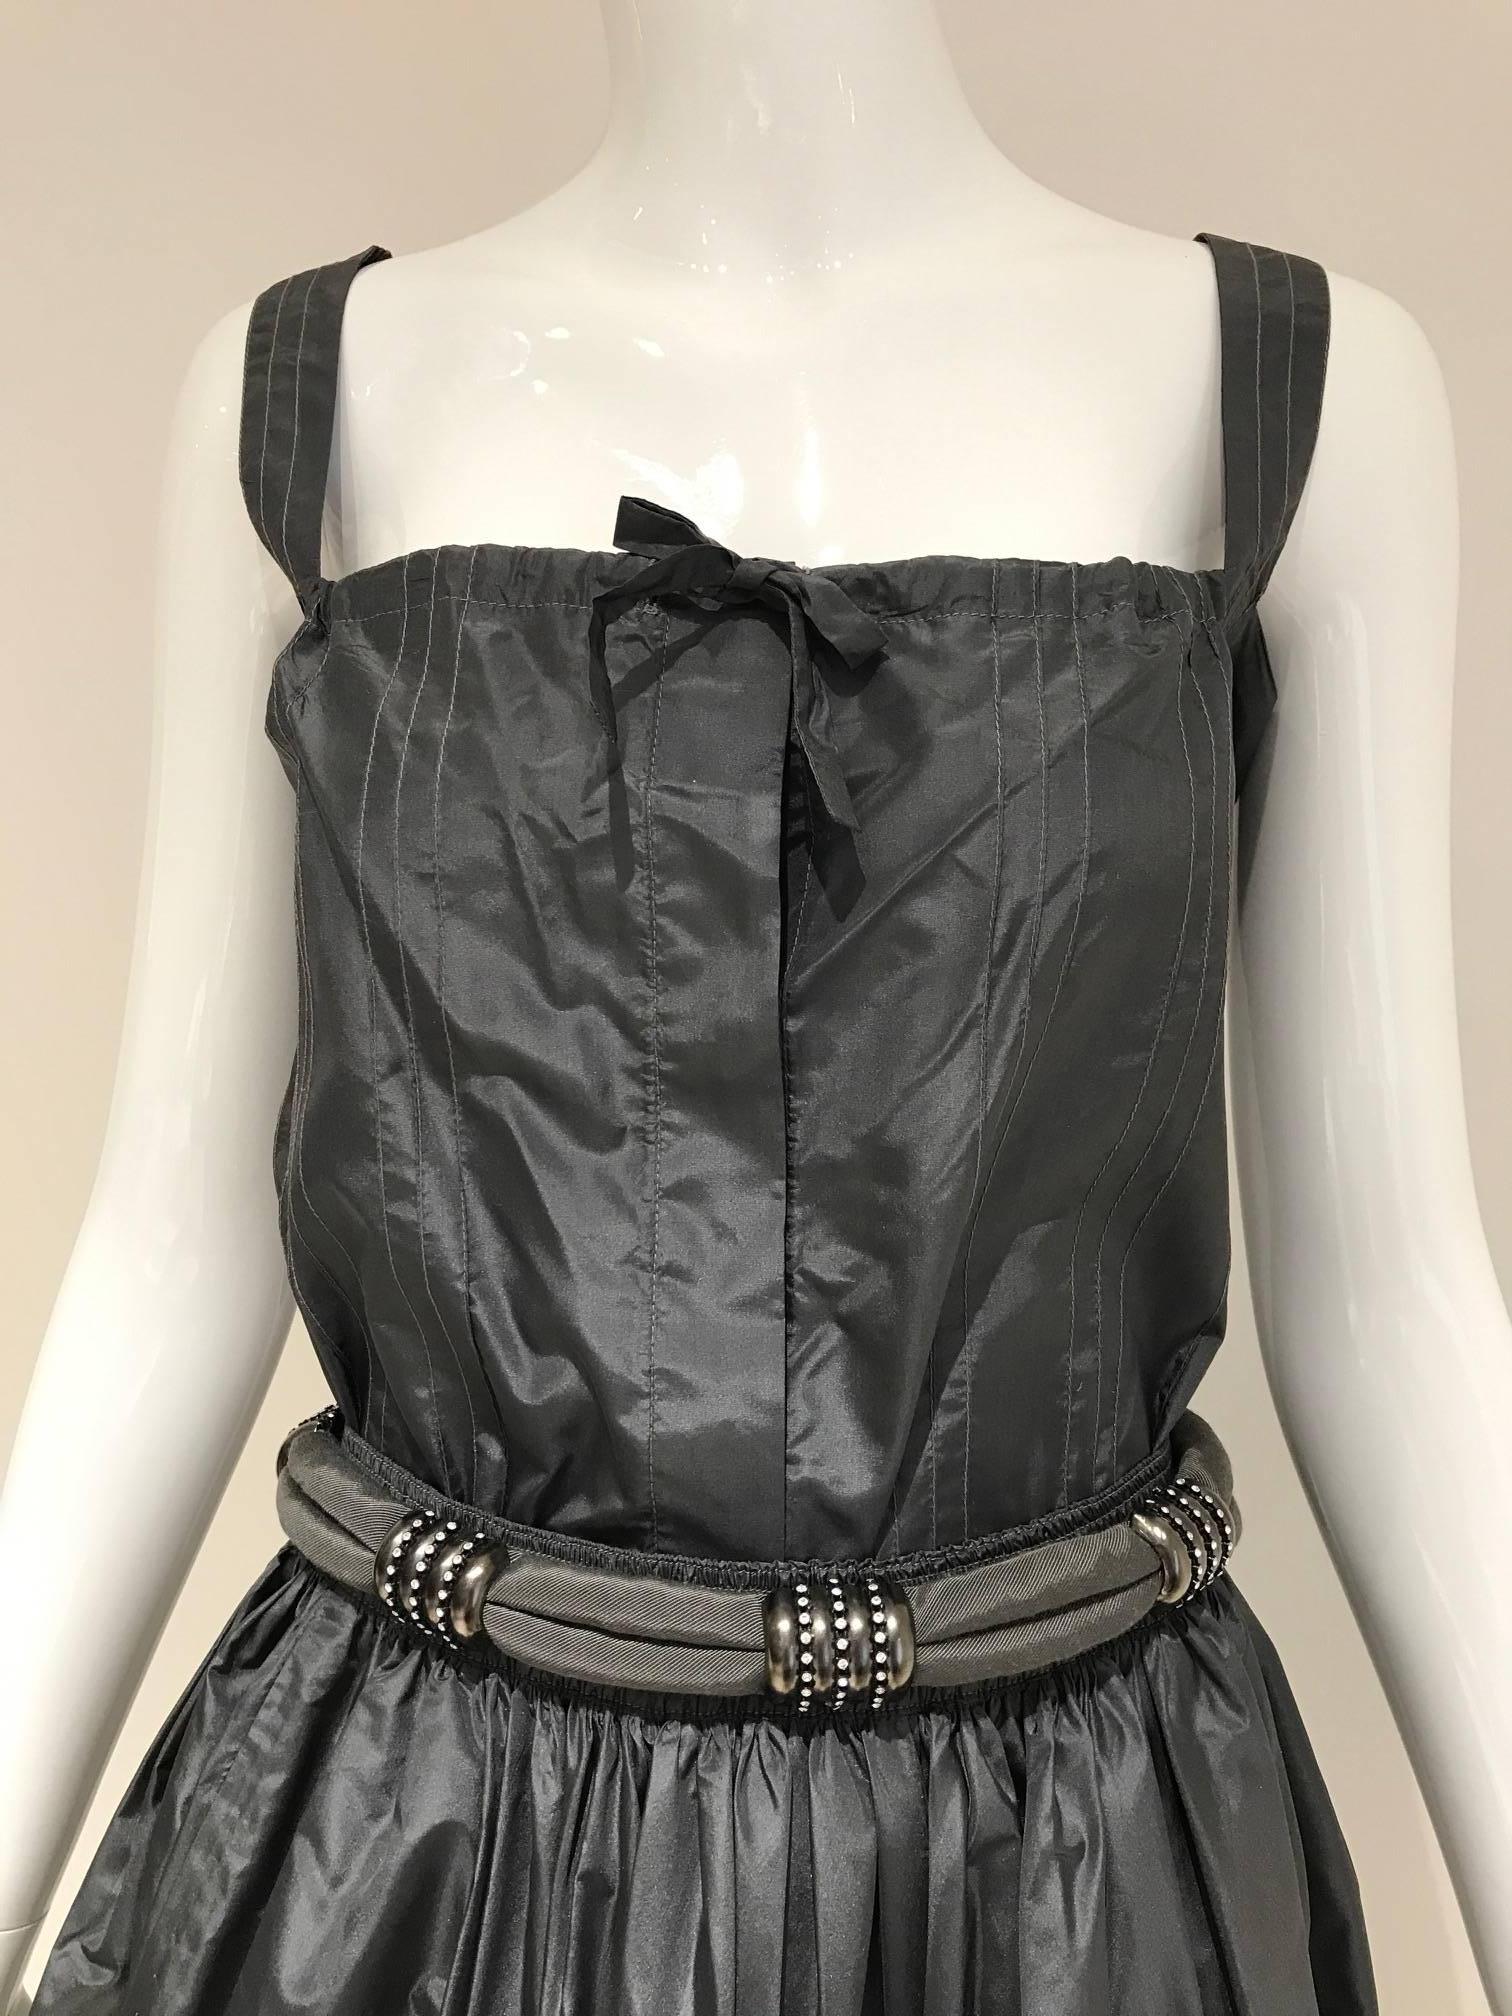 Beautiful 3 pcs vintage  Laura Biagiotti silk taffetta pewter tank top, skirt and belt set.
Top fit size 6 / Bust: 36 inches.
Skirt is elastic stretch to 30 inches/ Skirt Length: 35 inches